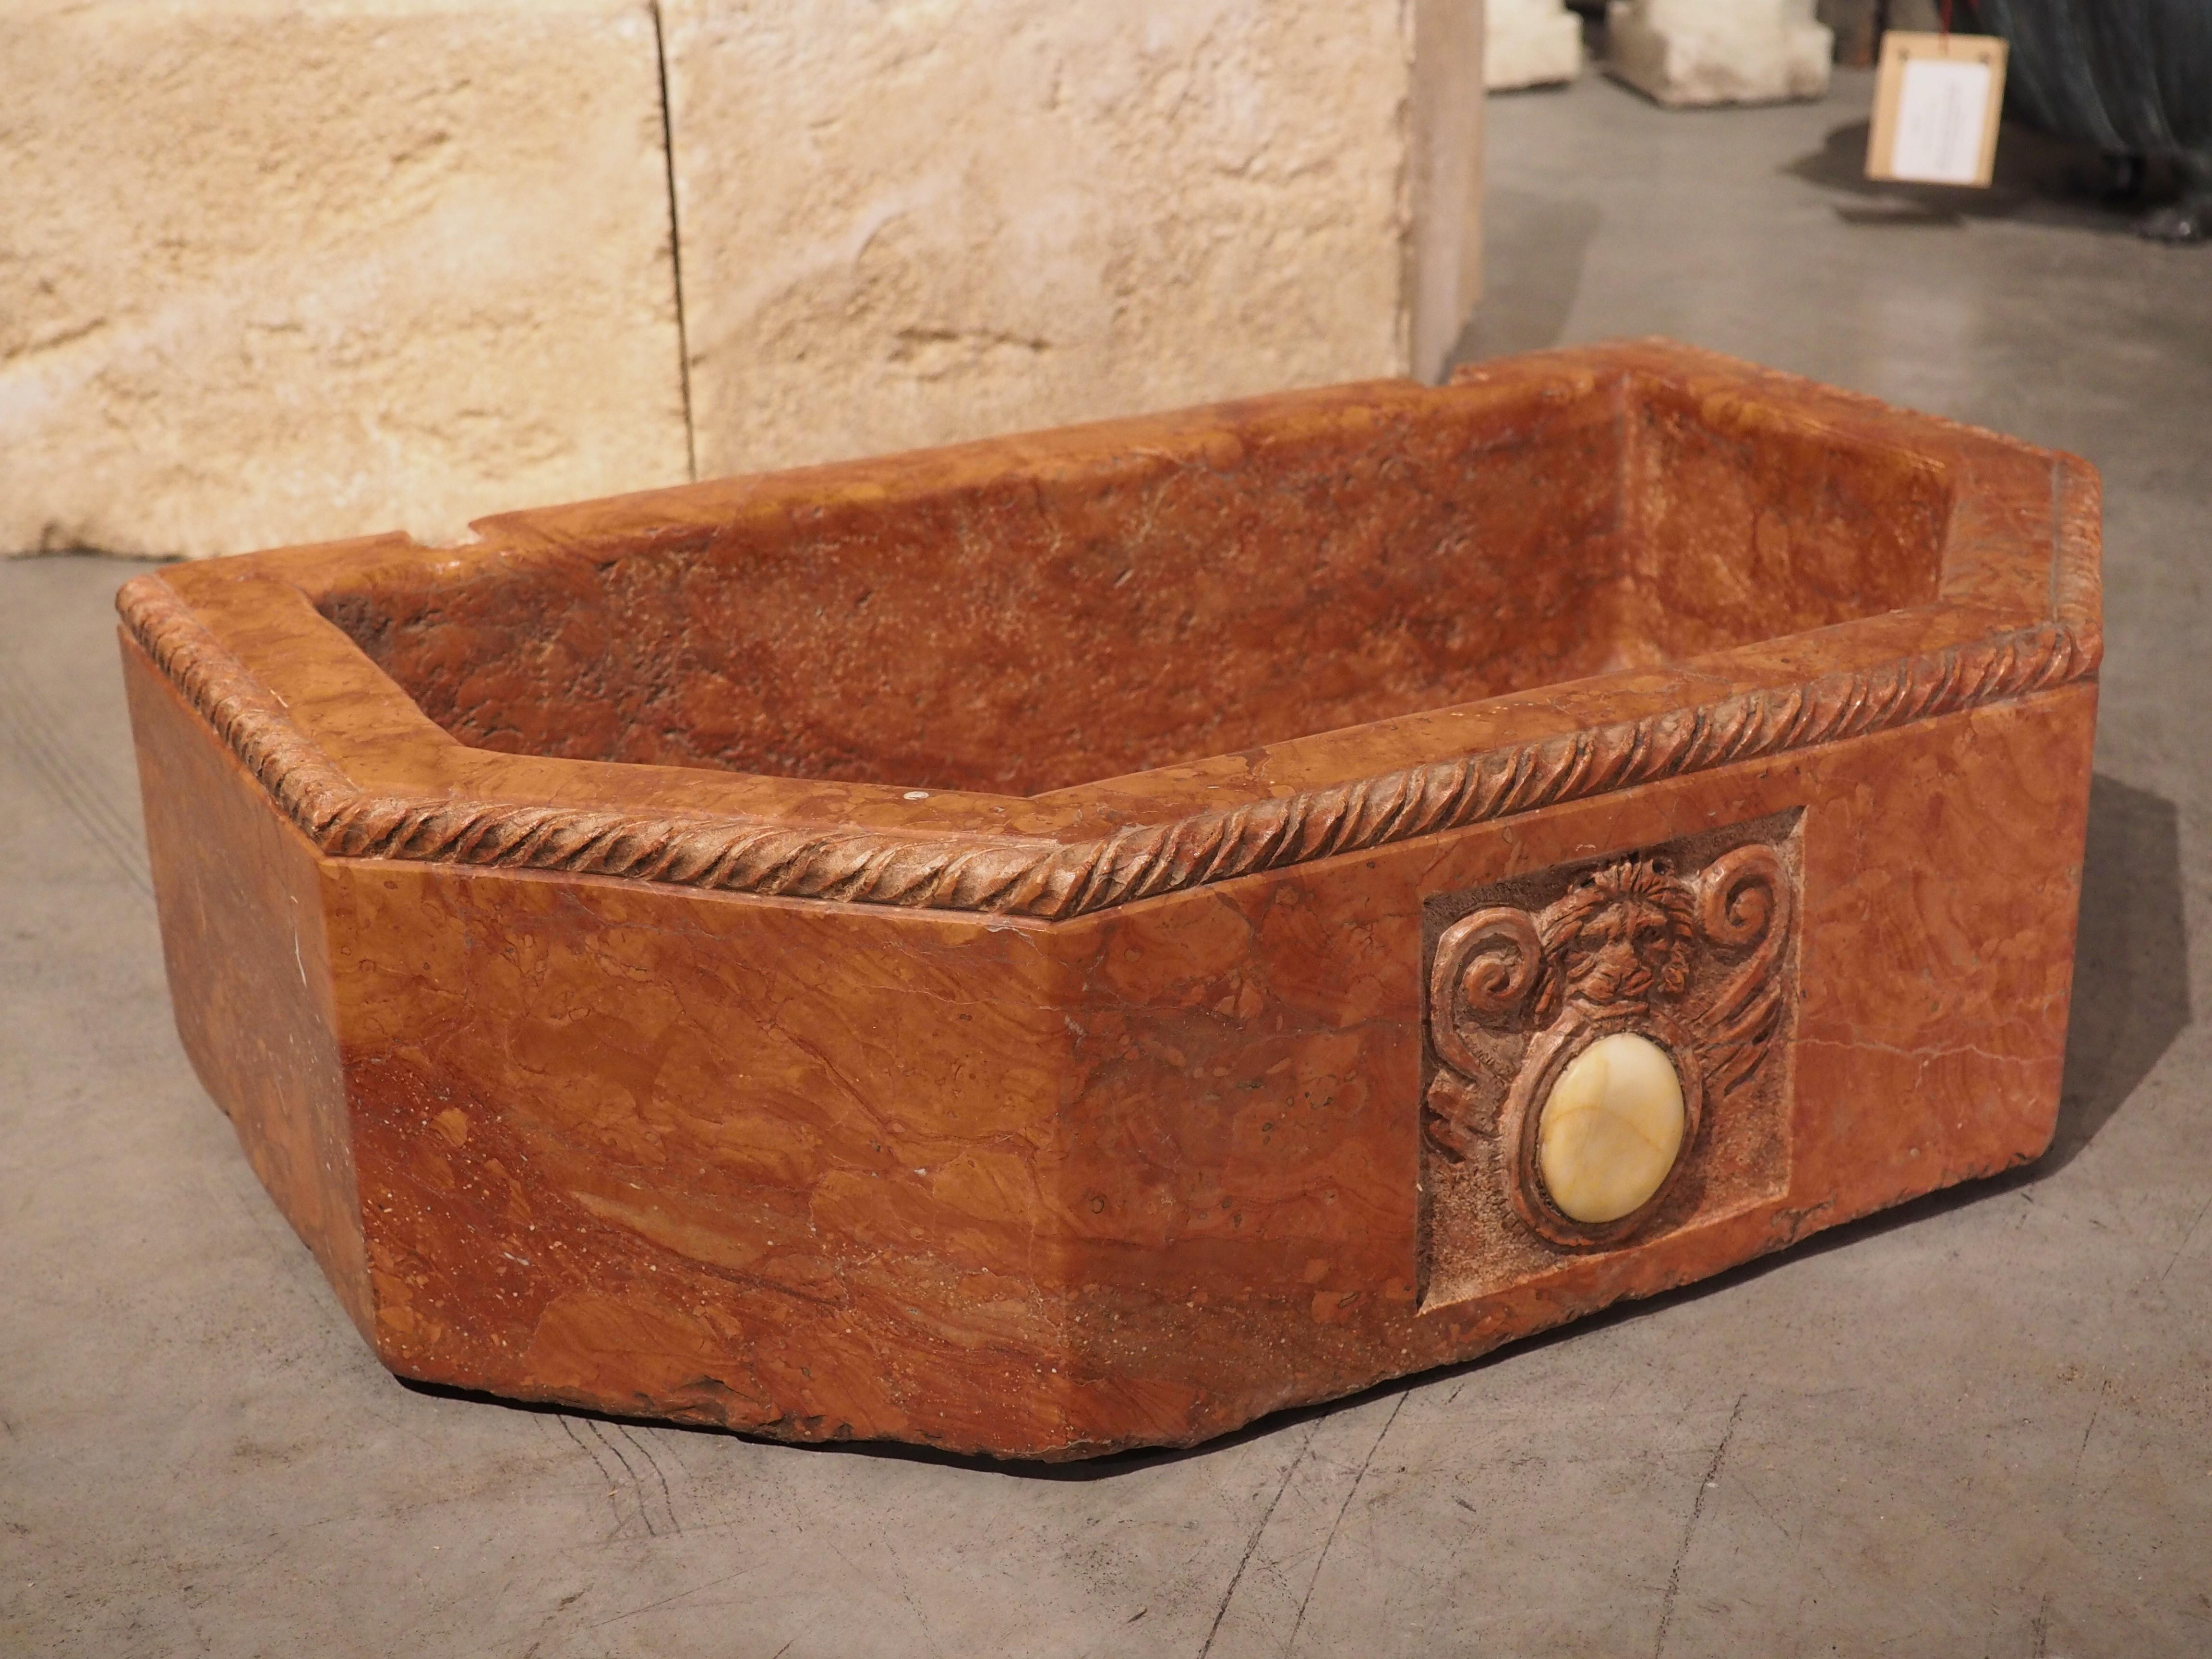 20th Century Italian Carved Hexagonal Marble Basin or Planter with Lion Cartouche